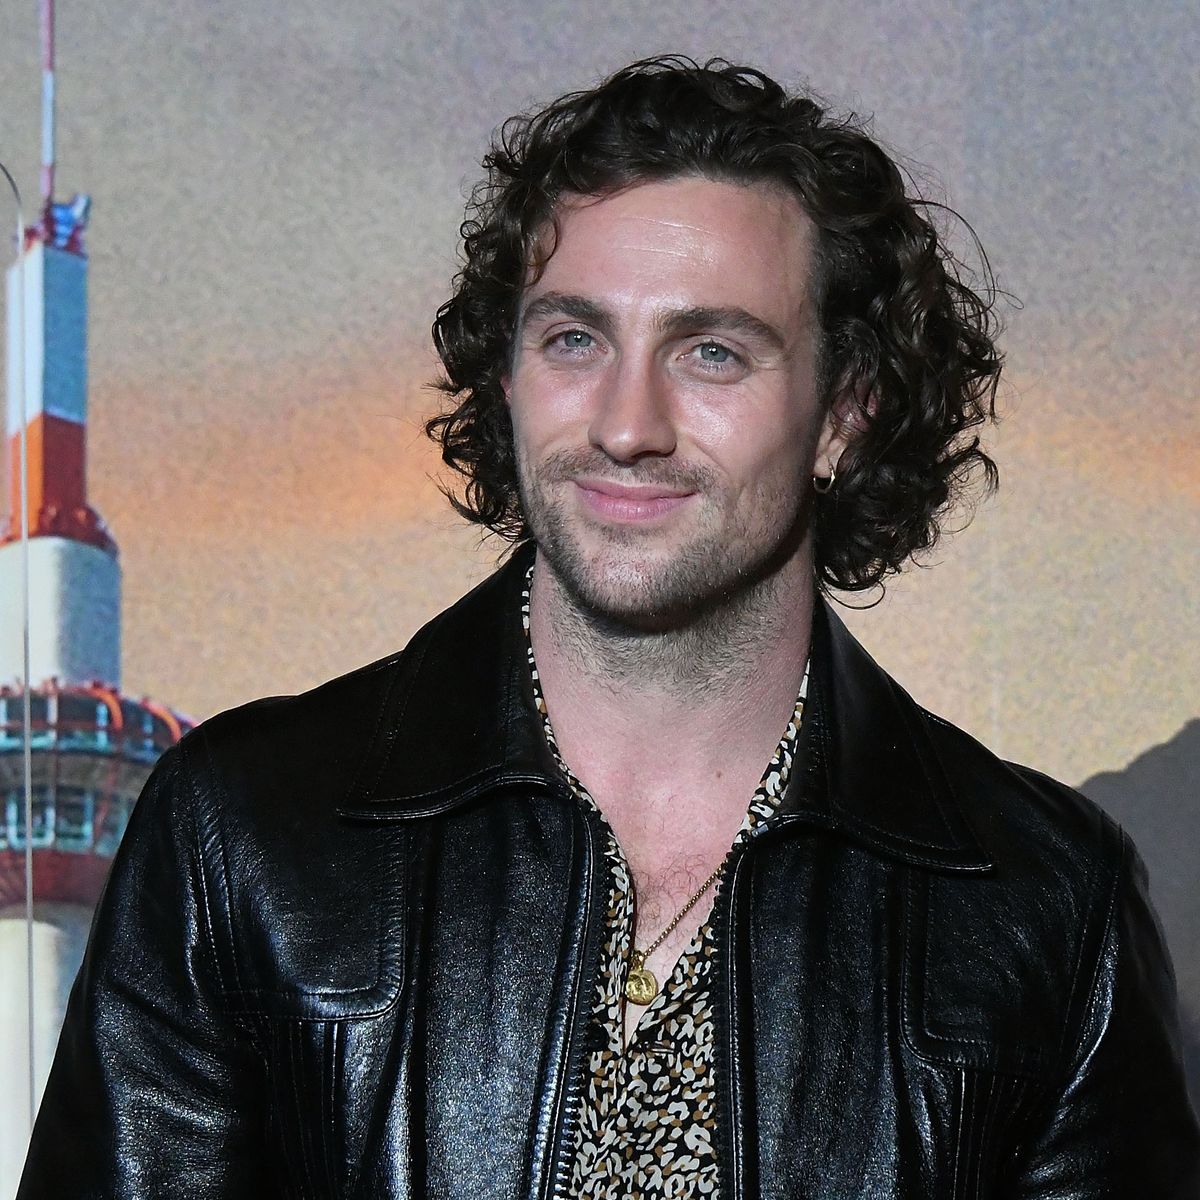 kyoto, japan august 23 aaron taylor johnson attends the bullet train stage greeting at toho cinemas kyoto on august 23, 2022 in kyoto, japan photo by jun satowireimage